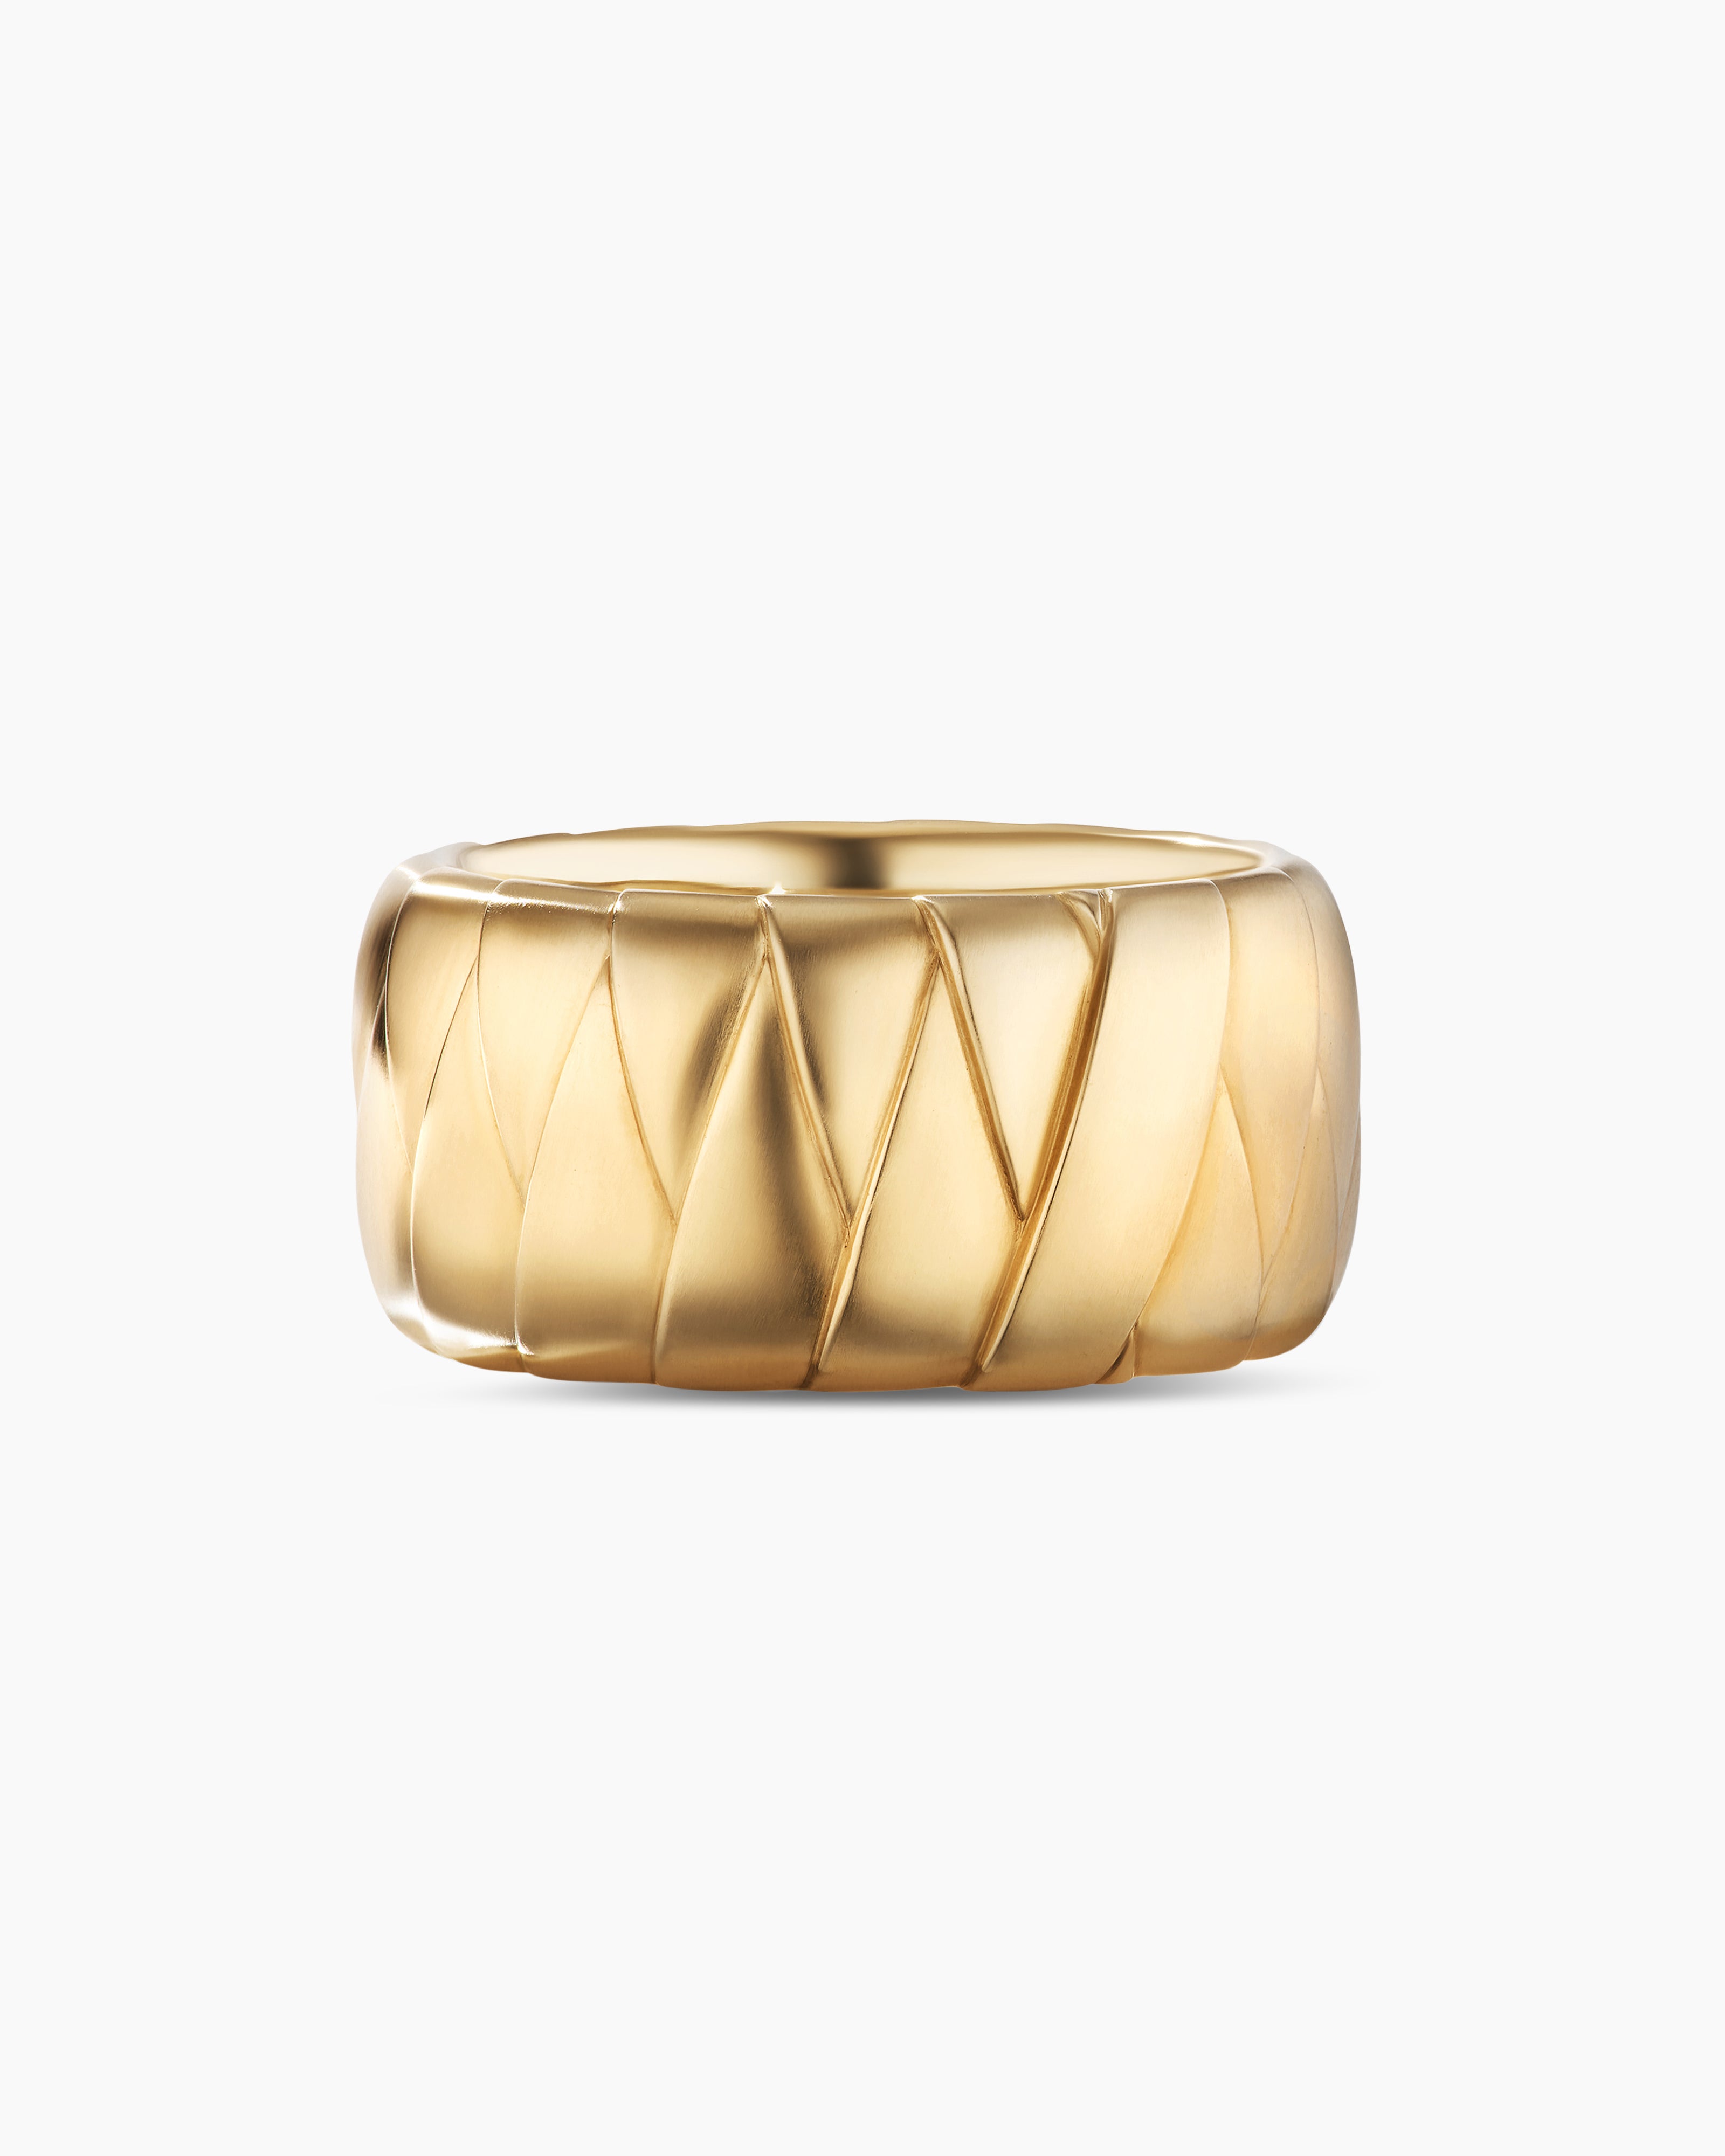 CHANEL COCO CRUSH Mini Rings: The Perfect Layering Ring